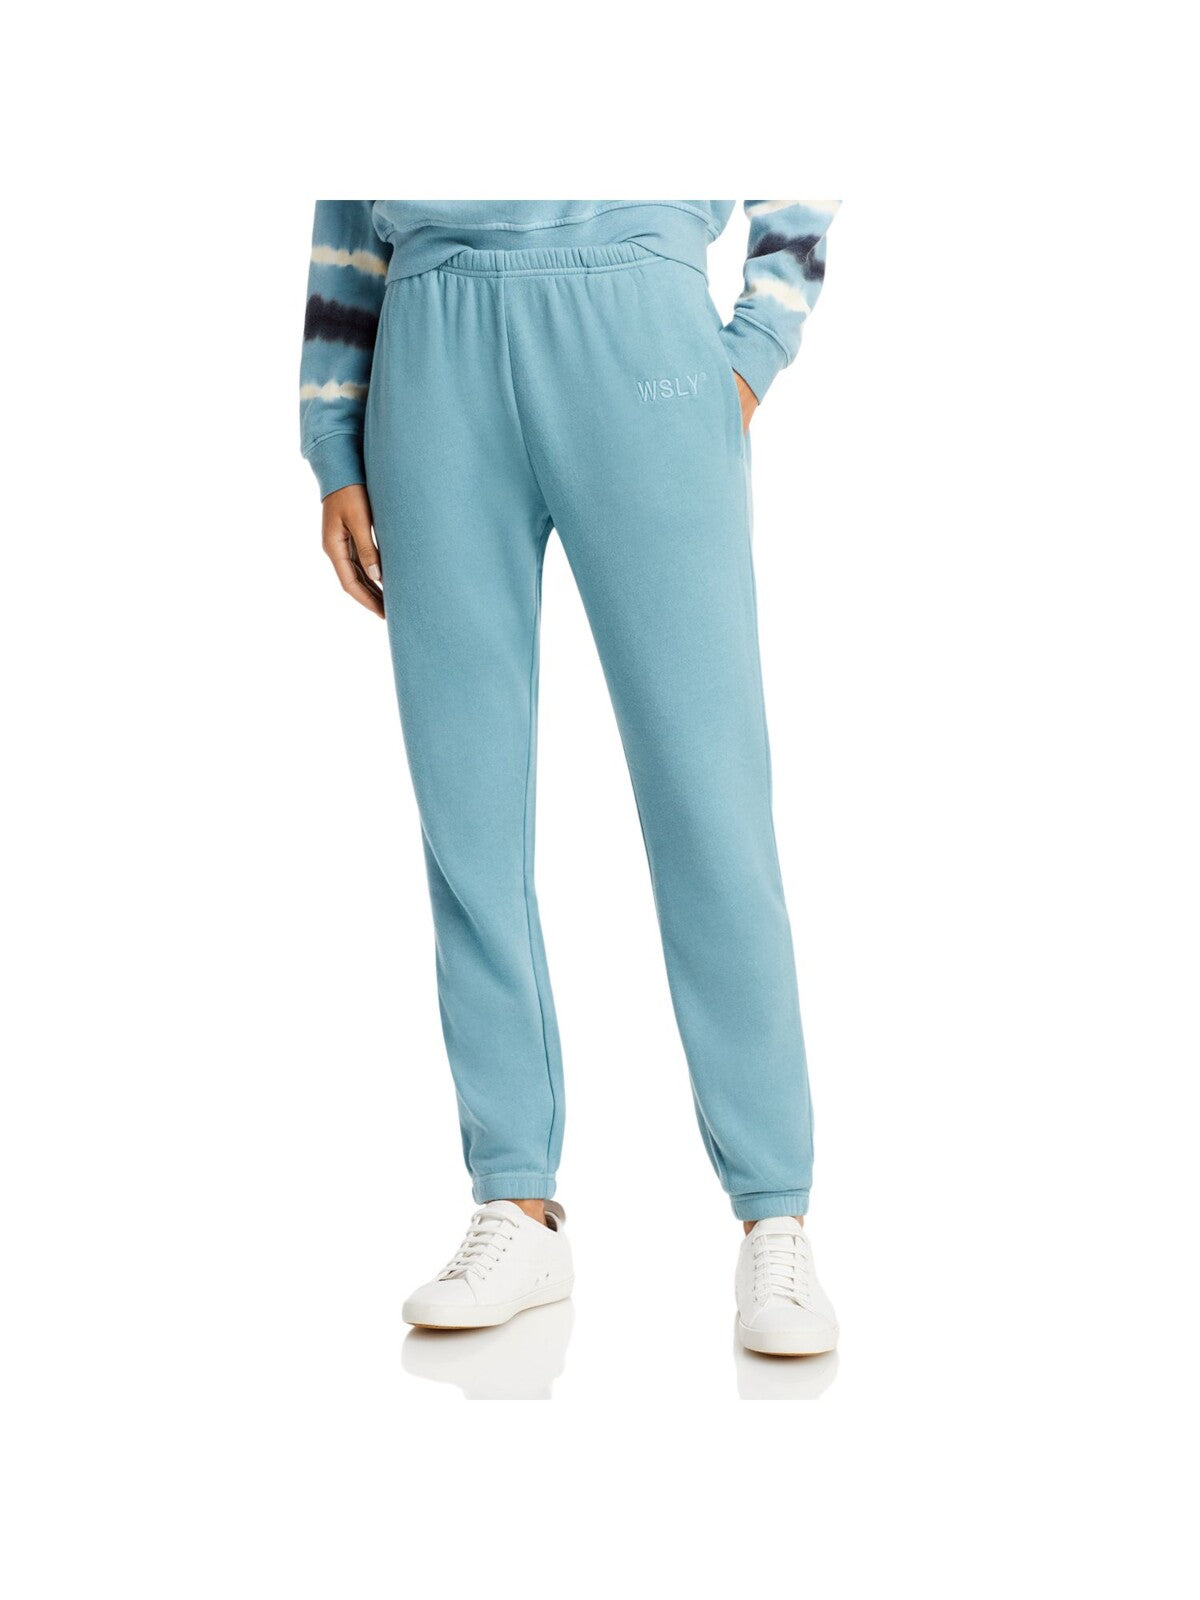 WSLY Womens Light Blue Stretch Pocketed Drawstring Jogger Elastic Waist Lounge Pants S